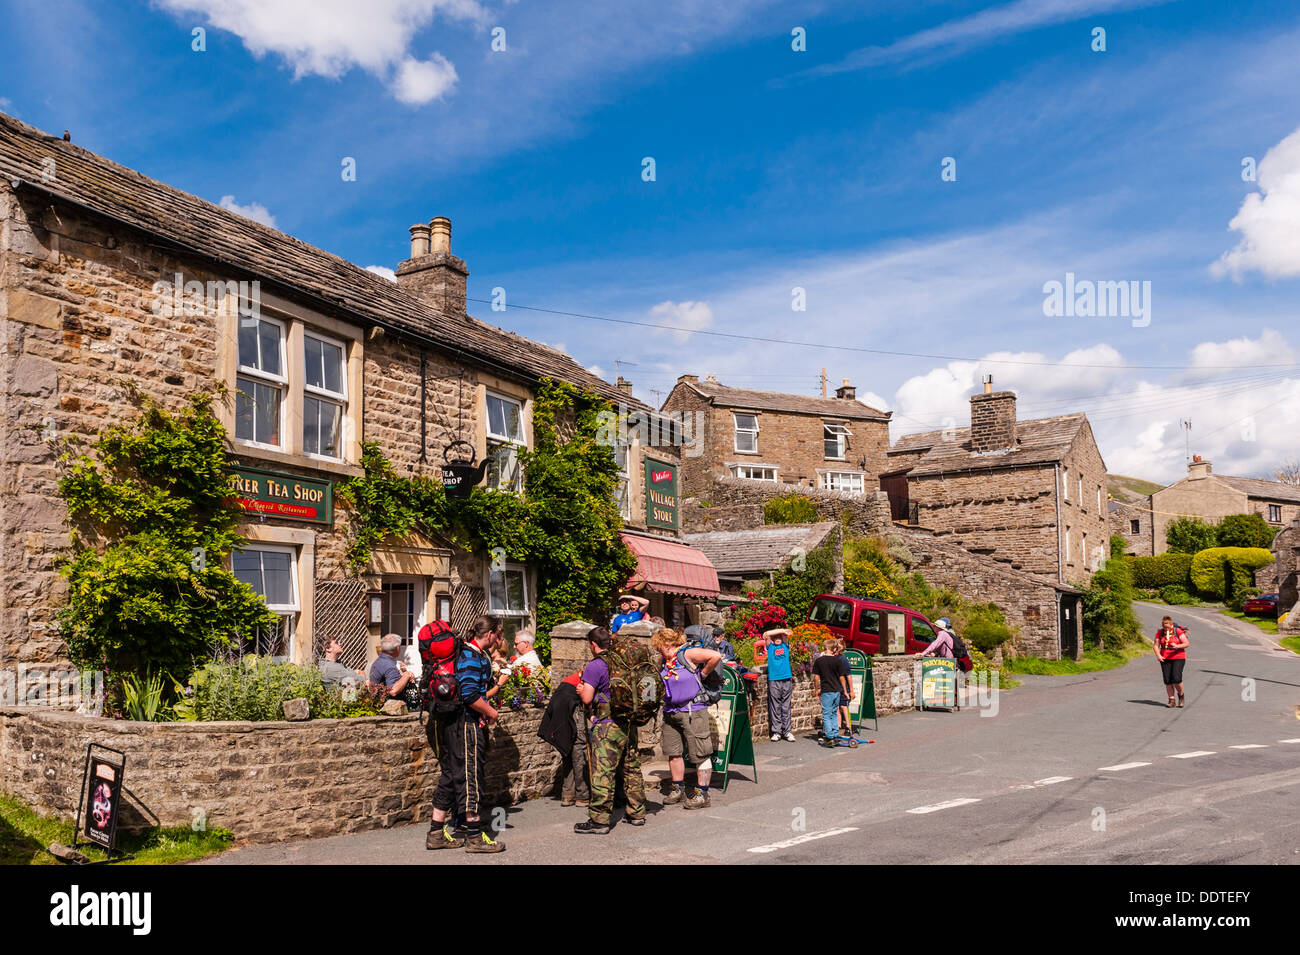 The Village Shop store and Tea shop with people outside at Muker in Swaledale , North Yorkshire , England, Britain, Uk Stock Photo